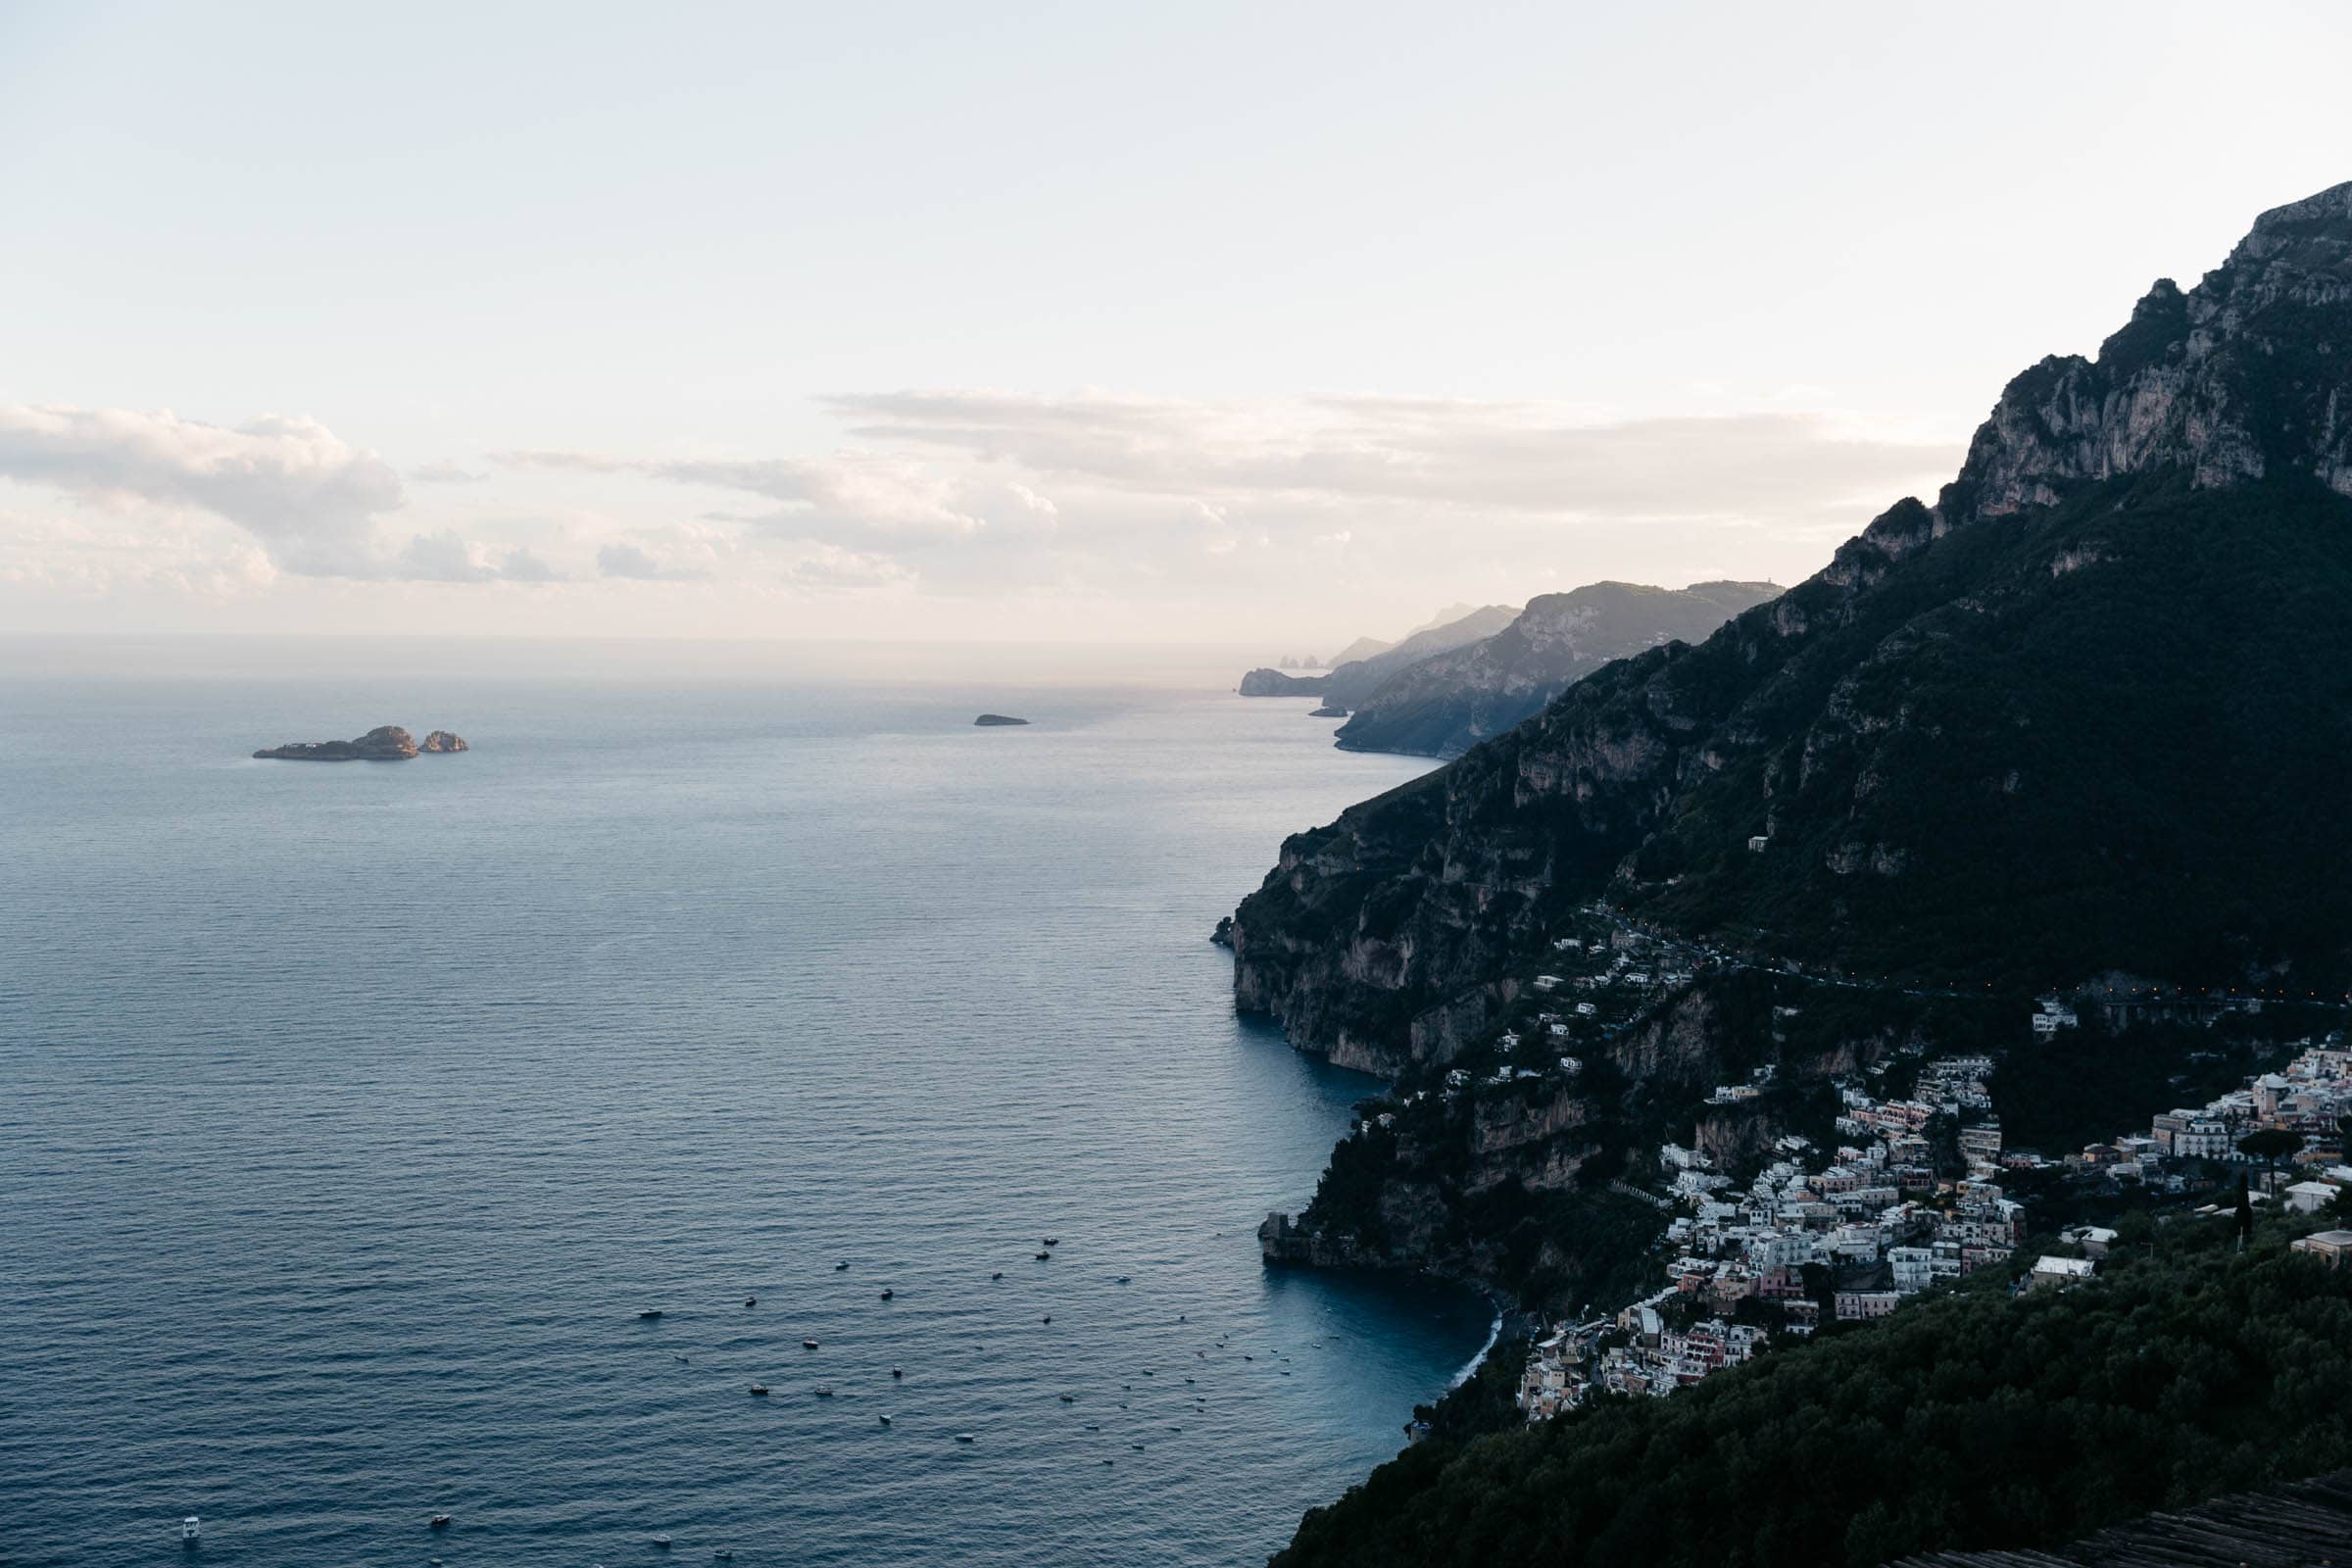 Where to watch the sunset Positano